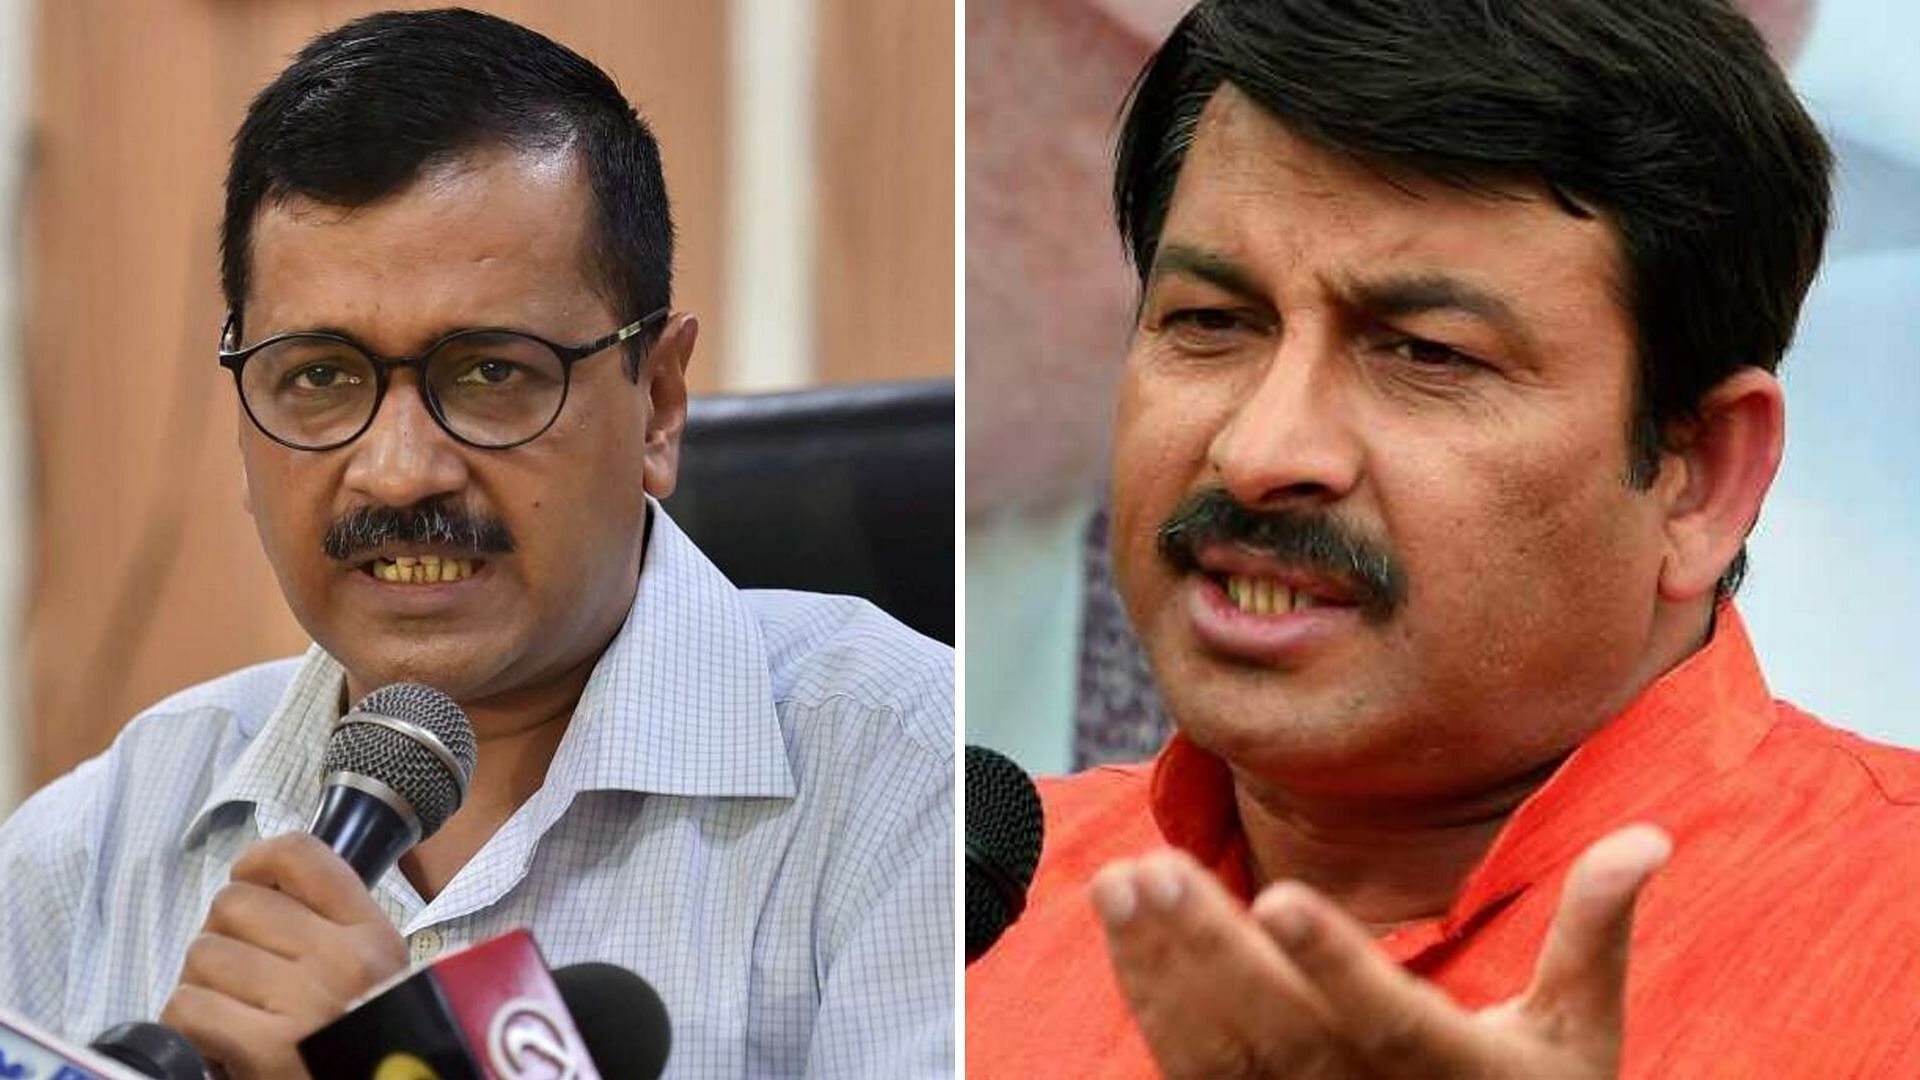 Manoj Tiwari has accused Delhi Chief Minister Arvind Kejriwal of showing hatred for people from Bihar.